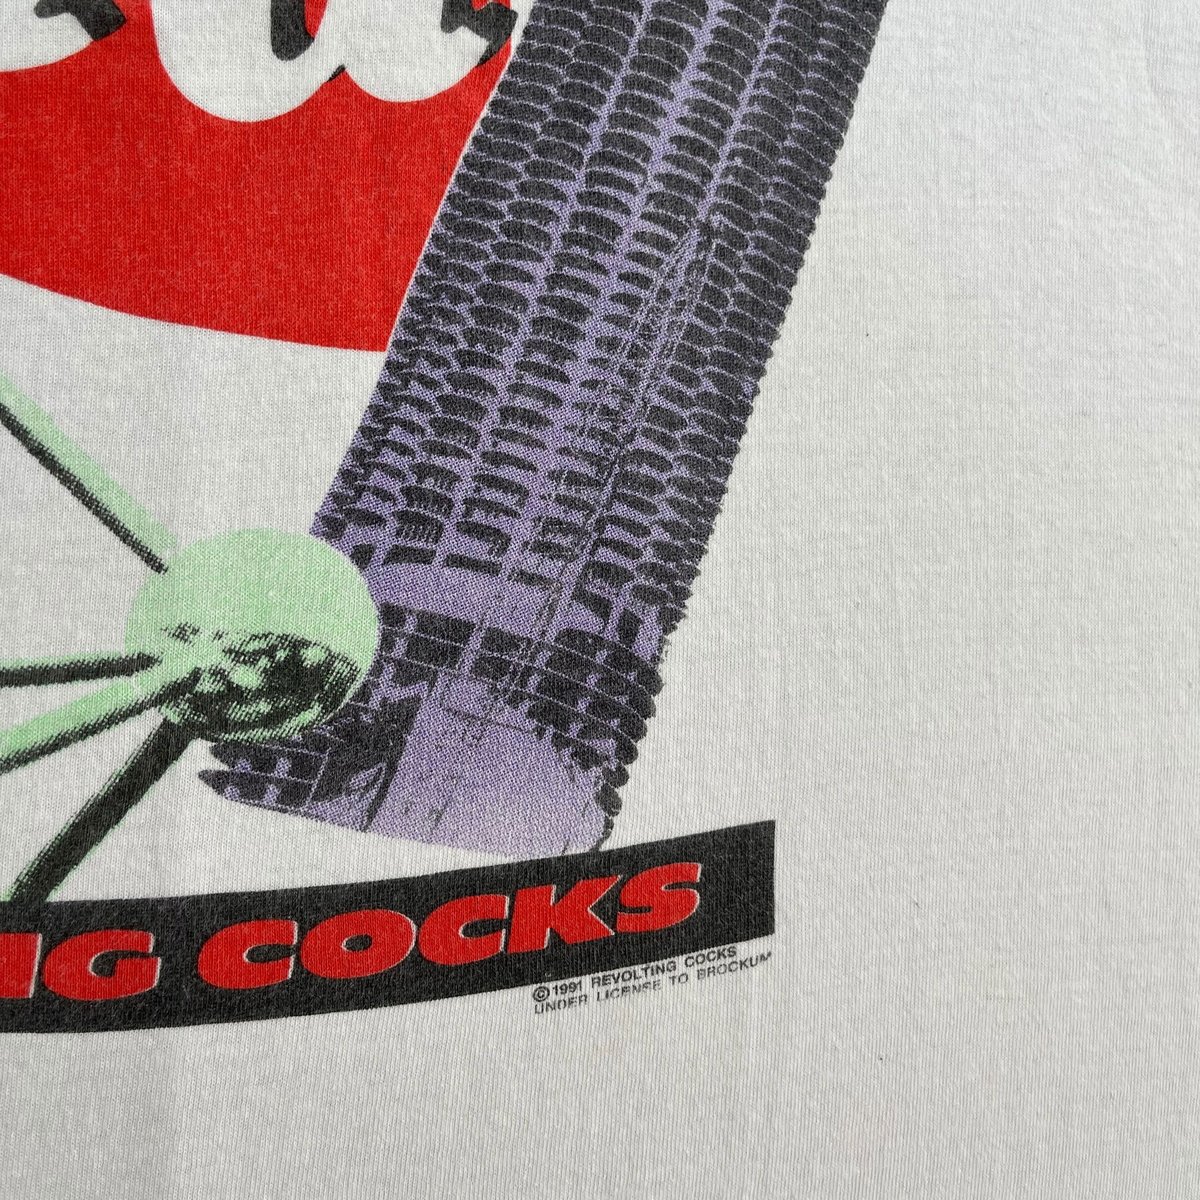 REVOLTING COCKS T shirt | DIRTY BOOTH